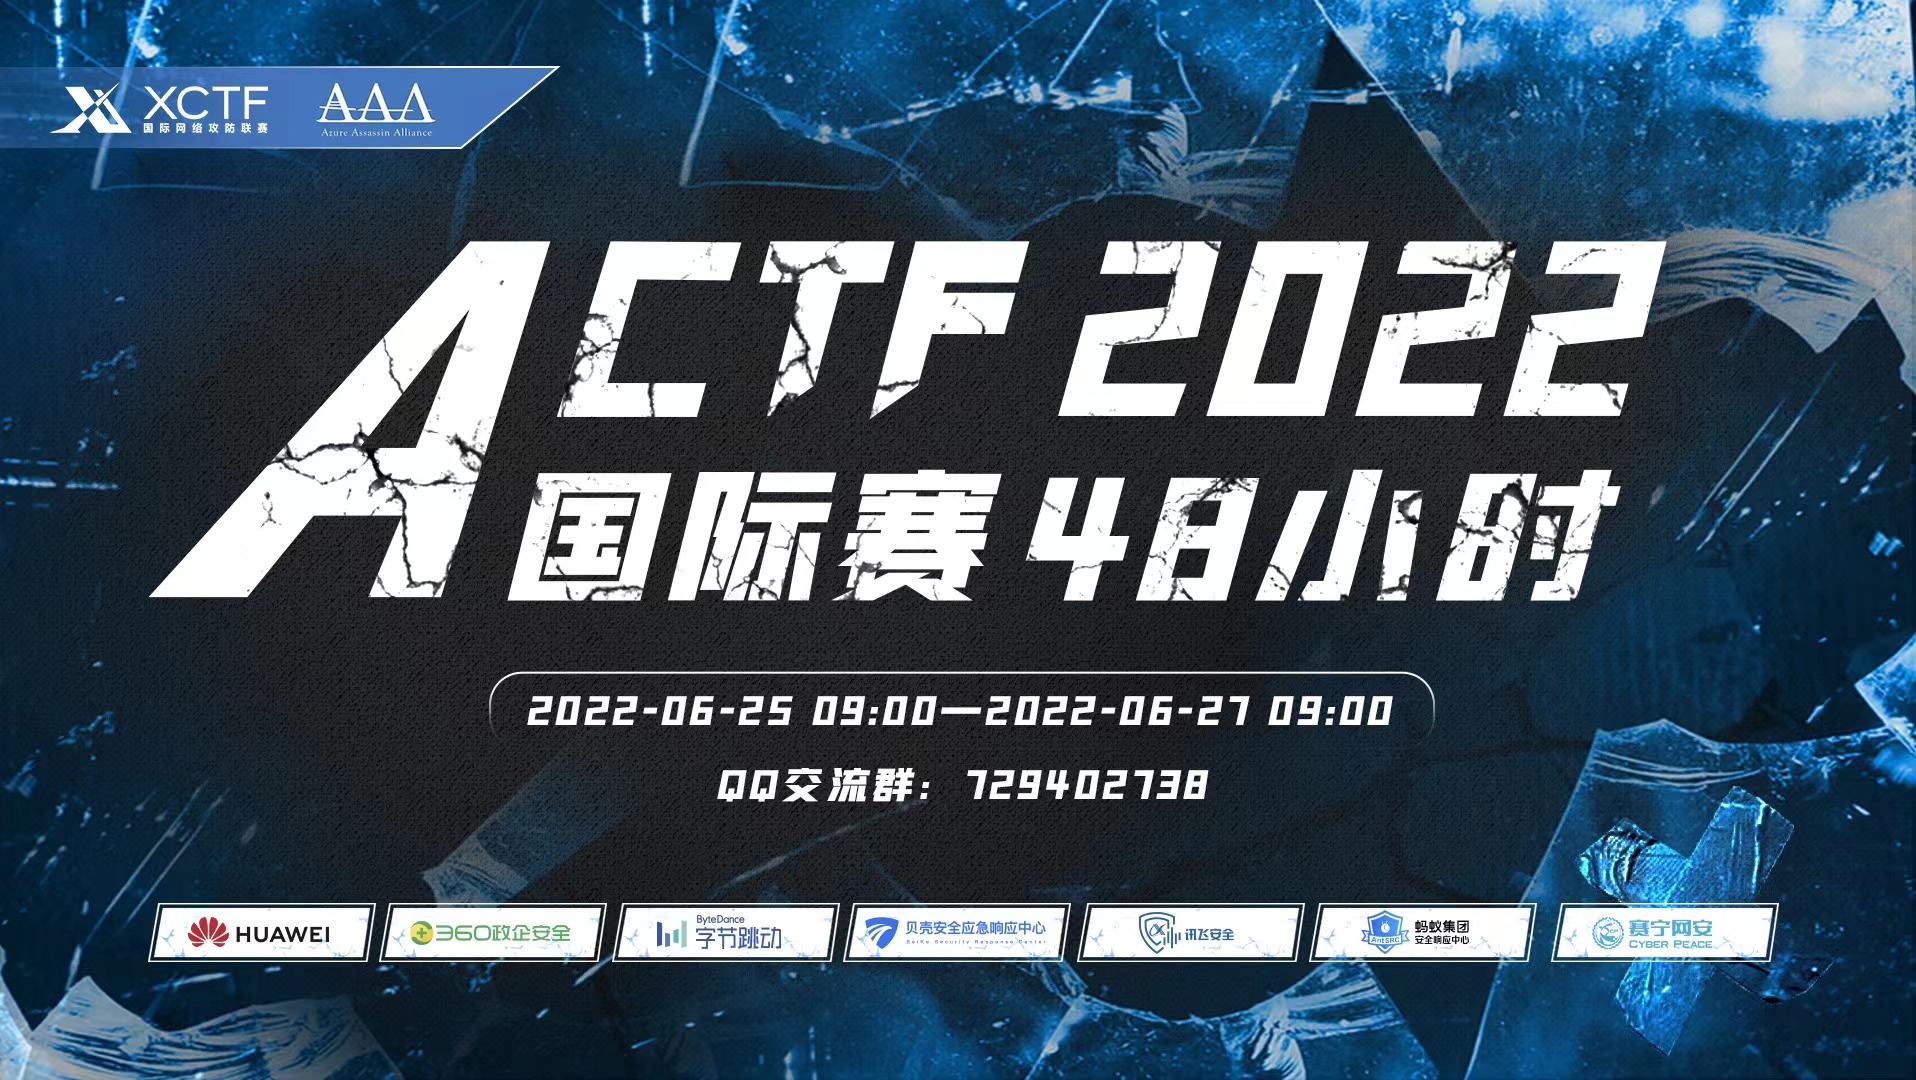 ACTF 2022 Writeup by X1cT34m